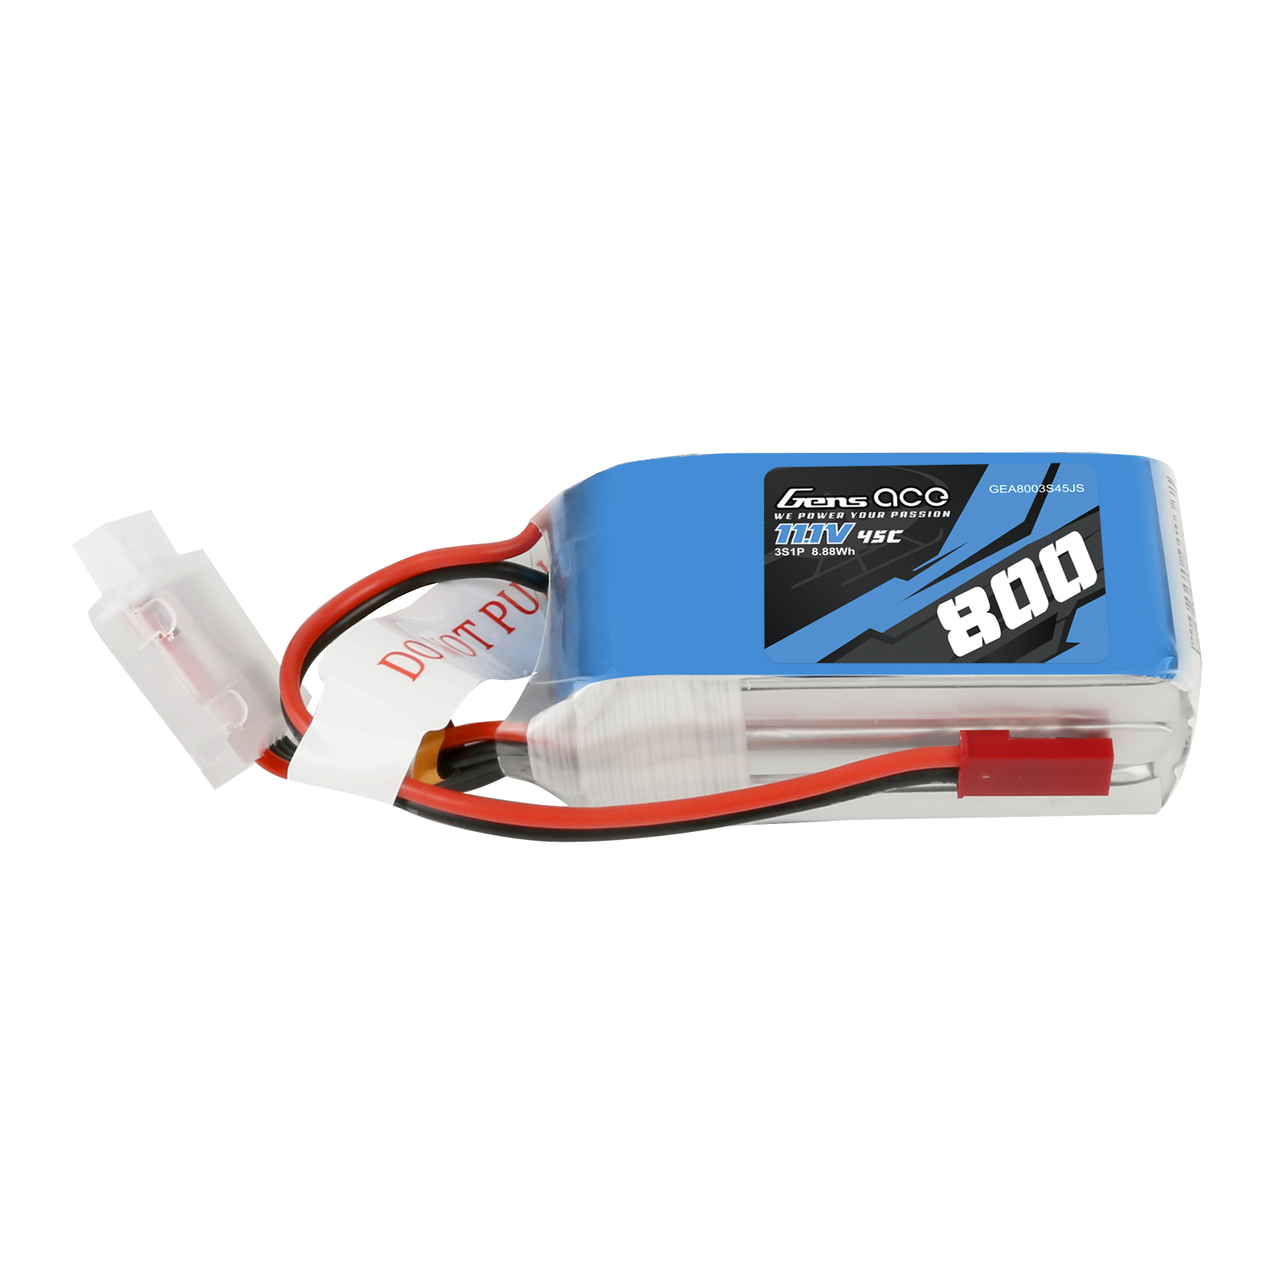 Copy of Gens ace 800mAh 11.1V 45C 3S1P Lipo Battery Pack with JST-SYP Plug